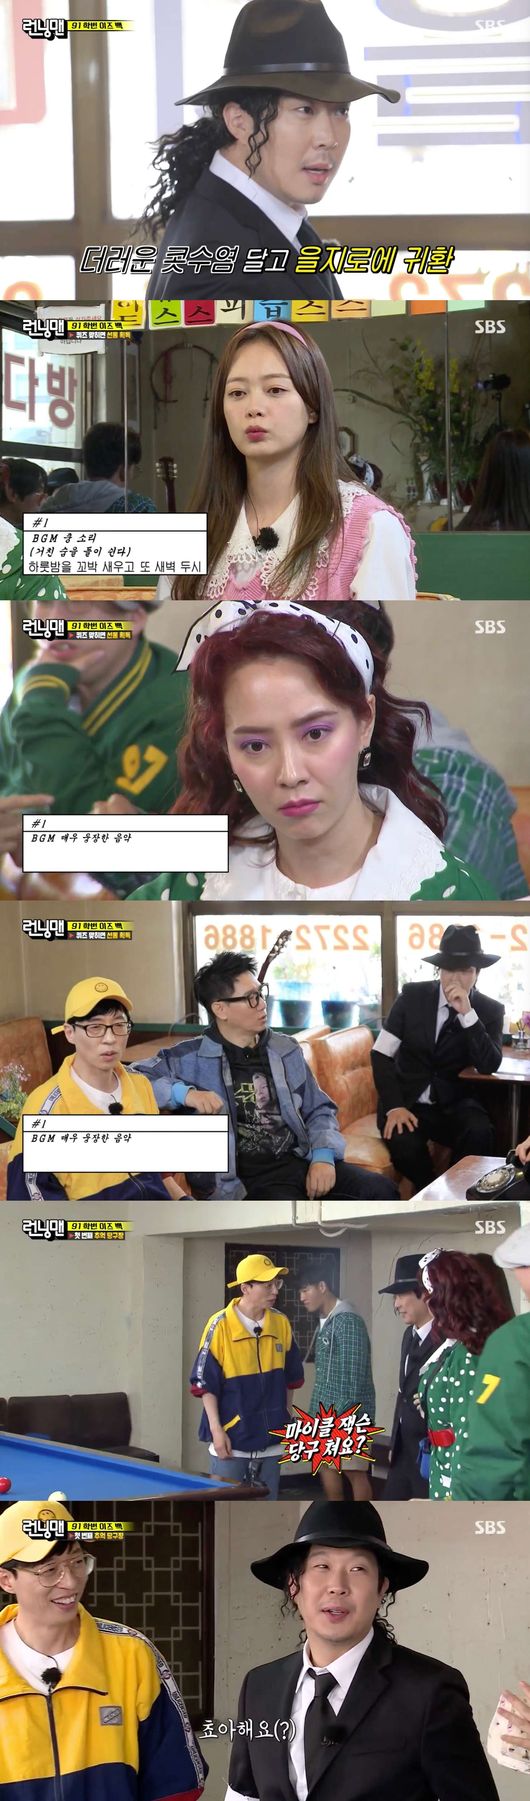 Running Man returned to 1991 and began to travel memories.On SBS Running Man broadcasted on the afternoon of the 25th, the members of the Seol In-ah, Lee Cho-hee, and Jin He-In were drawn.On the day, Running Man kung-kak Signal results showed three Yang Se-chan votes, two for Yoo Jae-Suk, one for Kim Jong-kook, and zero for Lee Kwang-soo and Haha and Ji Suk-jin.Yang Se-chan said, Whats my charm? My heart is beating suddenly. What should I do? Im so excited.I am so upset, said Jeon So-min, who envied I think he is attractive. Ji Suk-jin said, I feel so sick. I feel human betrayal.The long-awaited Running Man last order was the dessert Choices corner; as with lunchtime, the point-acquisition rule was the same.Kim Jong-kook predicted a couple with Seol In-ah, saying, I think Seol In-ah will fit well with me as a partner with exercise and passion. Yoo Jae-suk said, The goal is one for me.I will only take Ji Hyo, said Song Ji-hyo.Running Man Lee Cho-hee explained why he gave Yang Se-chan two votes, saying, It was a strong member at the first impression, so its just that.Then Jeon So-min said: I think we might have to really date after today.I do not like the possibility, I do not want it very much, said Lee Cho-hee, who shook his head.Yang Se-chan said, I dont know why Lee Cho-hee did it. He picked me for the first impression. Why did you pick me?I am so excited, he said with a confident expression.In particular, Yang Se-chan said of Lee Kwang-soo, who received 0 votes, It is a trap to emit too much charm without self-attraction.I have to know and come at it, Lee Kwang-soo said, Savoe was condescending and sick. Savoie was shit and sick.Imagine you are lying at home drunk at home after drinking beer at home later in the evening. Ahead of the final Choices, Lee Cho-hee said, Single-mindedly style, dandelion, first impression was good.Yang Se-chan also said, Its a great satisfaction.I will now show you the Single-mindedly dandelion behavior because Lee Cho-hee has been Choicesing me. Lee Kwang-soo, on the other hand, said: Lee Cho-hee was really the worst; I ate together for a while and then I felt it, my face full of greed and heartache.You dont have to do Choices me, Yang Se-chan keeps doing the intrusive things, he said, angry.Running Man final result: Jeon So-min gives Ji Suk-jin, Song Ji-hyo gives Haha, Haha gives Song Ji-hyo, Ji Suk-jin gives Seol In-ah, Seol In-ah gives Kim Jong-kook, Kim Jong-kook gives Seol In-ah, Lee Kw Jang-soo took the Jeong He-In, Jeong He-In took the Yang Se-chan, Lee Cho-hee took the Yang Se-chan, and Yang Se-chan took the Lee Cho-hee.Yoo Jae-Suk gave up voting, saying, I can not see someone else changing my life.Song Ji-hyo, Yang Se-chan and Seol In-ah won gold, while Lee Kwang-soo, Ji Suk-jin, Jeon So-min and Jin He-In were penalized.Running Man Yoo Jae-Suk, Ji Suk-jin, Kim Jong-kook, Jeon So-min, Song Ji-hyo, Lee Kwang-soo, Haha and Yang Se-chan conducted 91 class is BACK Race.Running Man members transformed to 91st grade, and joined the retro craze by summoning old memories perfectly.Not only fashion, but also the view of the times, back in 1991, and reenacted the time perfectly.Running Man members recalled each others memories, and boasted their fashion fashion and made viewers laugh.Unlike other members, Michael Jackson drives a smile on Haha.Today we are going to introduce the culture of the 90s, and as we have returned to 30 years ago, we have prepared 20 items that remember the 90s as gifts.We have to acquire 20 gifts. The members of Running Man fell into a memorable trip listening to the song of the 91s and CM songs that the production team presented.In the first round of Running Man 91st Izback, Haha and Lee Kwang-soo succeeded in the mission, Haha was Lee Munse 7th LP and Lee Kwang-soo was Choices.In a moving car, Yoo Jae-Suk asked Ji Suk-jins question, If you go back to 1991, will you go? No, I dont want to lose all my memories.I do not want to live with that idea again. Yoo Jae-Suk also said, It was not too fun,  Kim Jong-kook said.Im going to take my mind now, he said.On the other hand, SBS Running Man is an entertainment program where many stars and members carry out missions together and concentrate on laughing. It is broadcast every Sunday at 5 pm.SBS Running Man